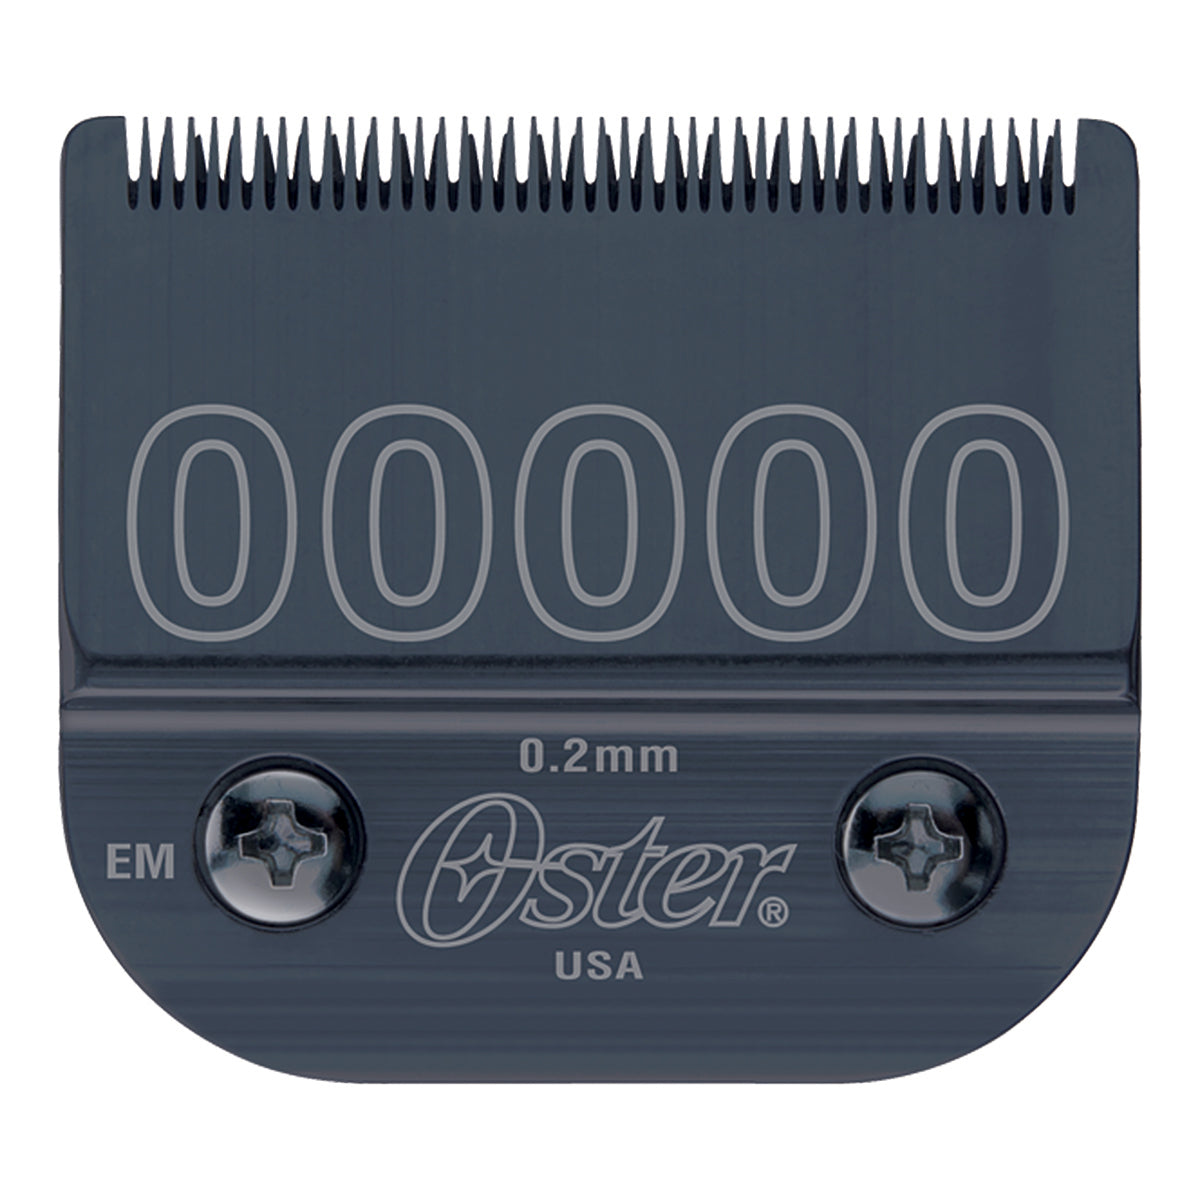 Oster Professional Detachable Clipper Blade Size 00000